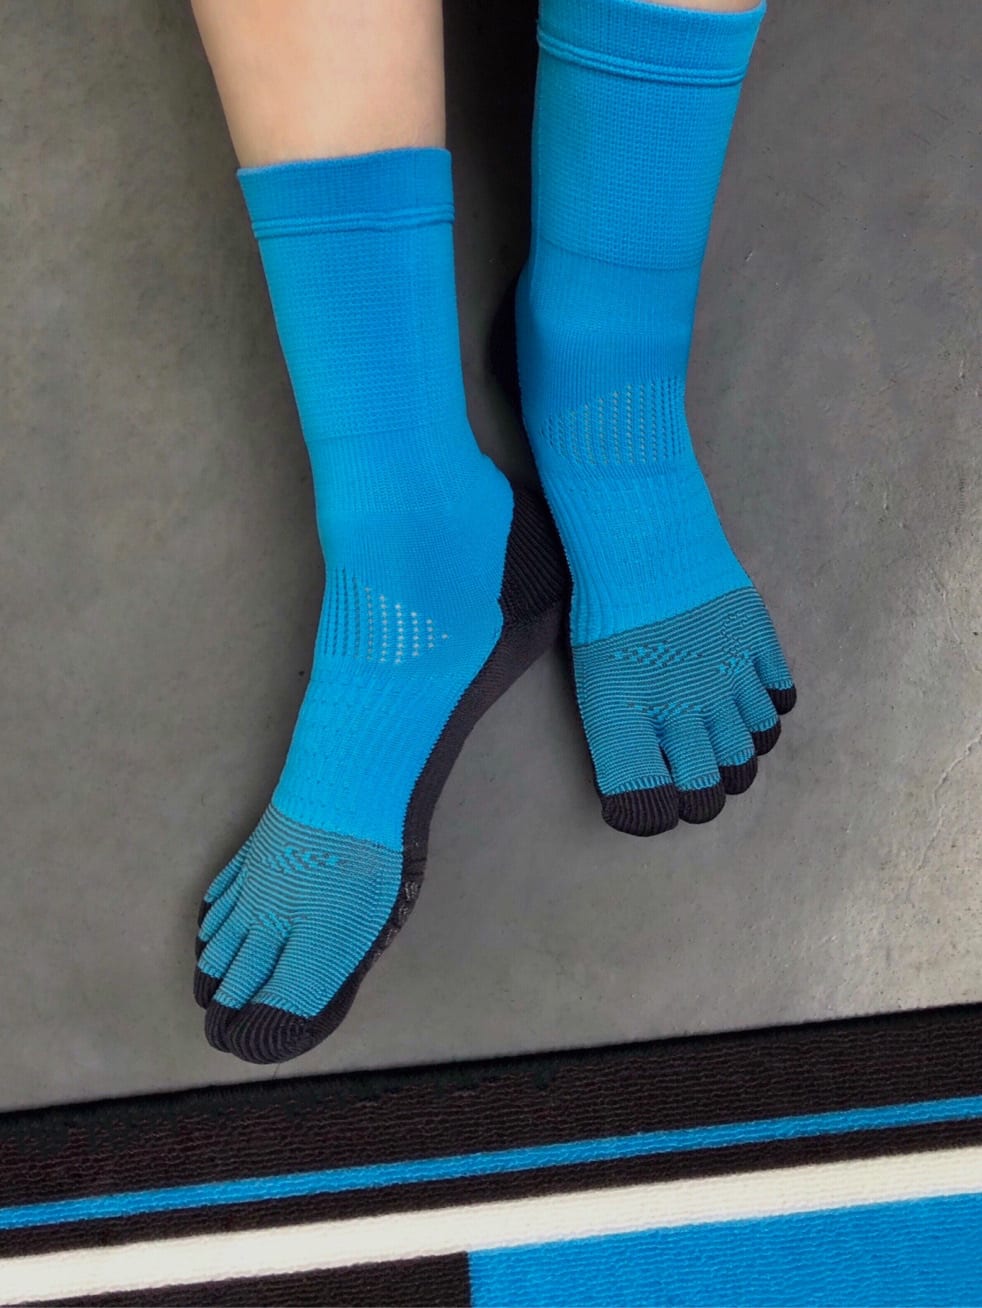 Have you seen the best football socks in the market? – Tabio UK